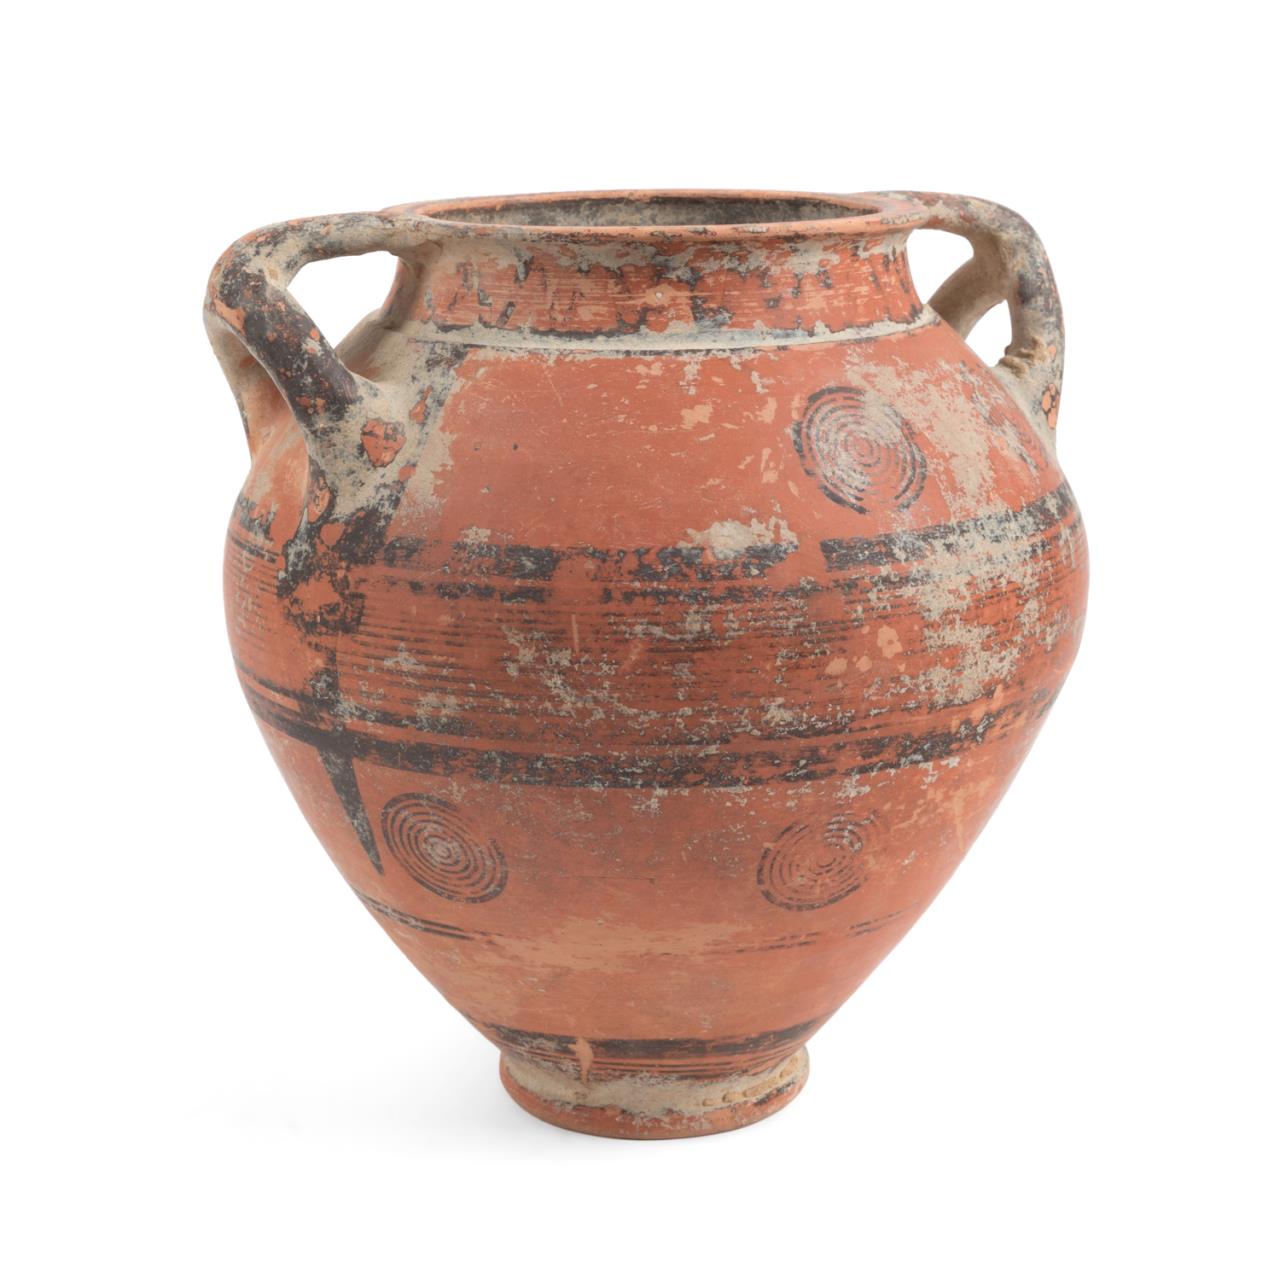 ARCHAIC STYLE PAINT DECORATED TERRACOTTA 2f99c3